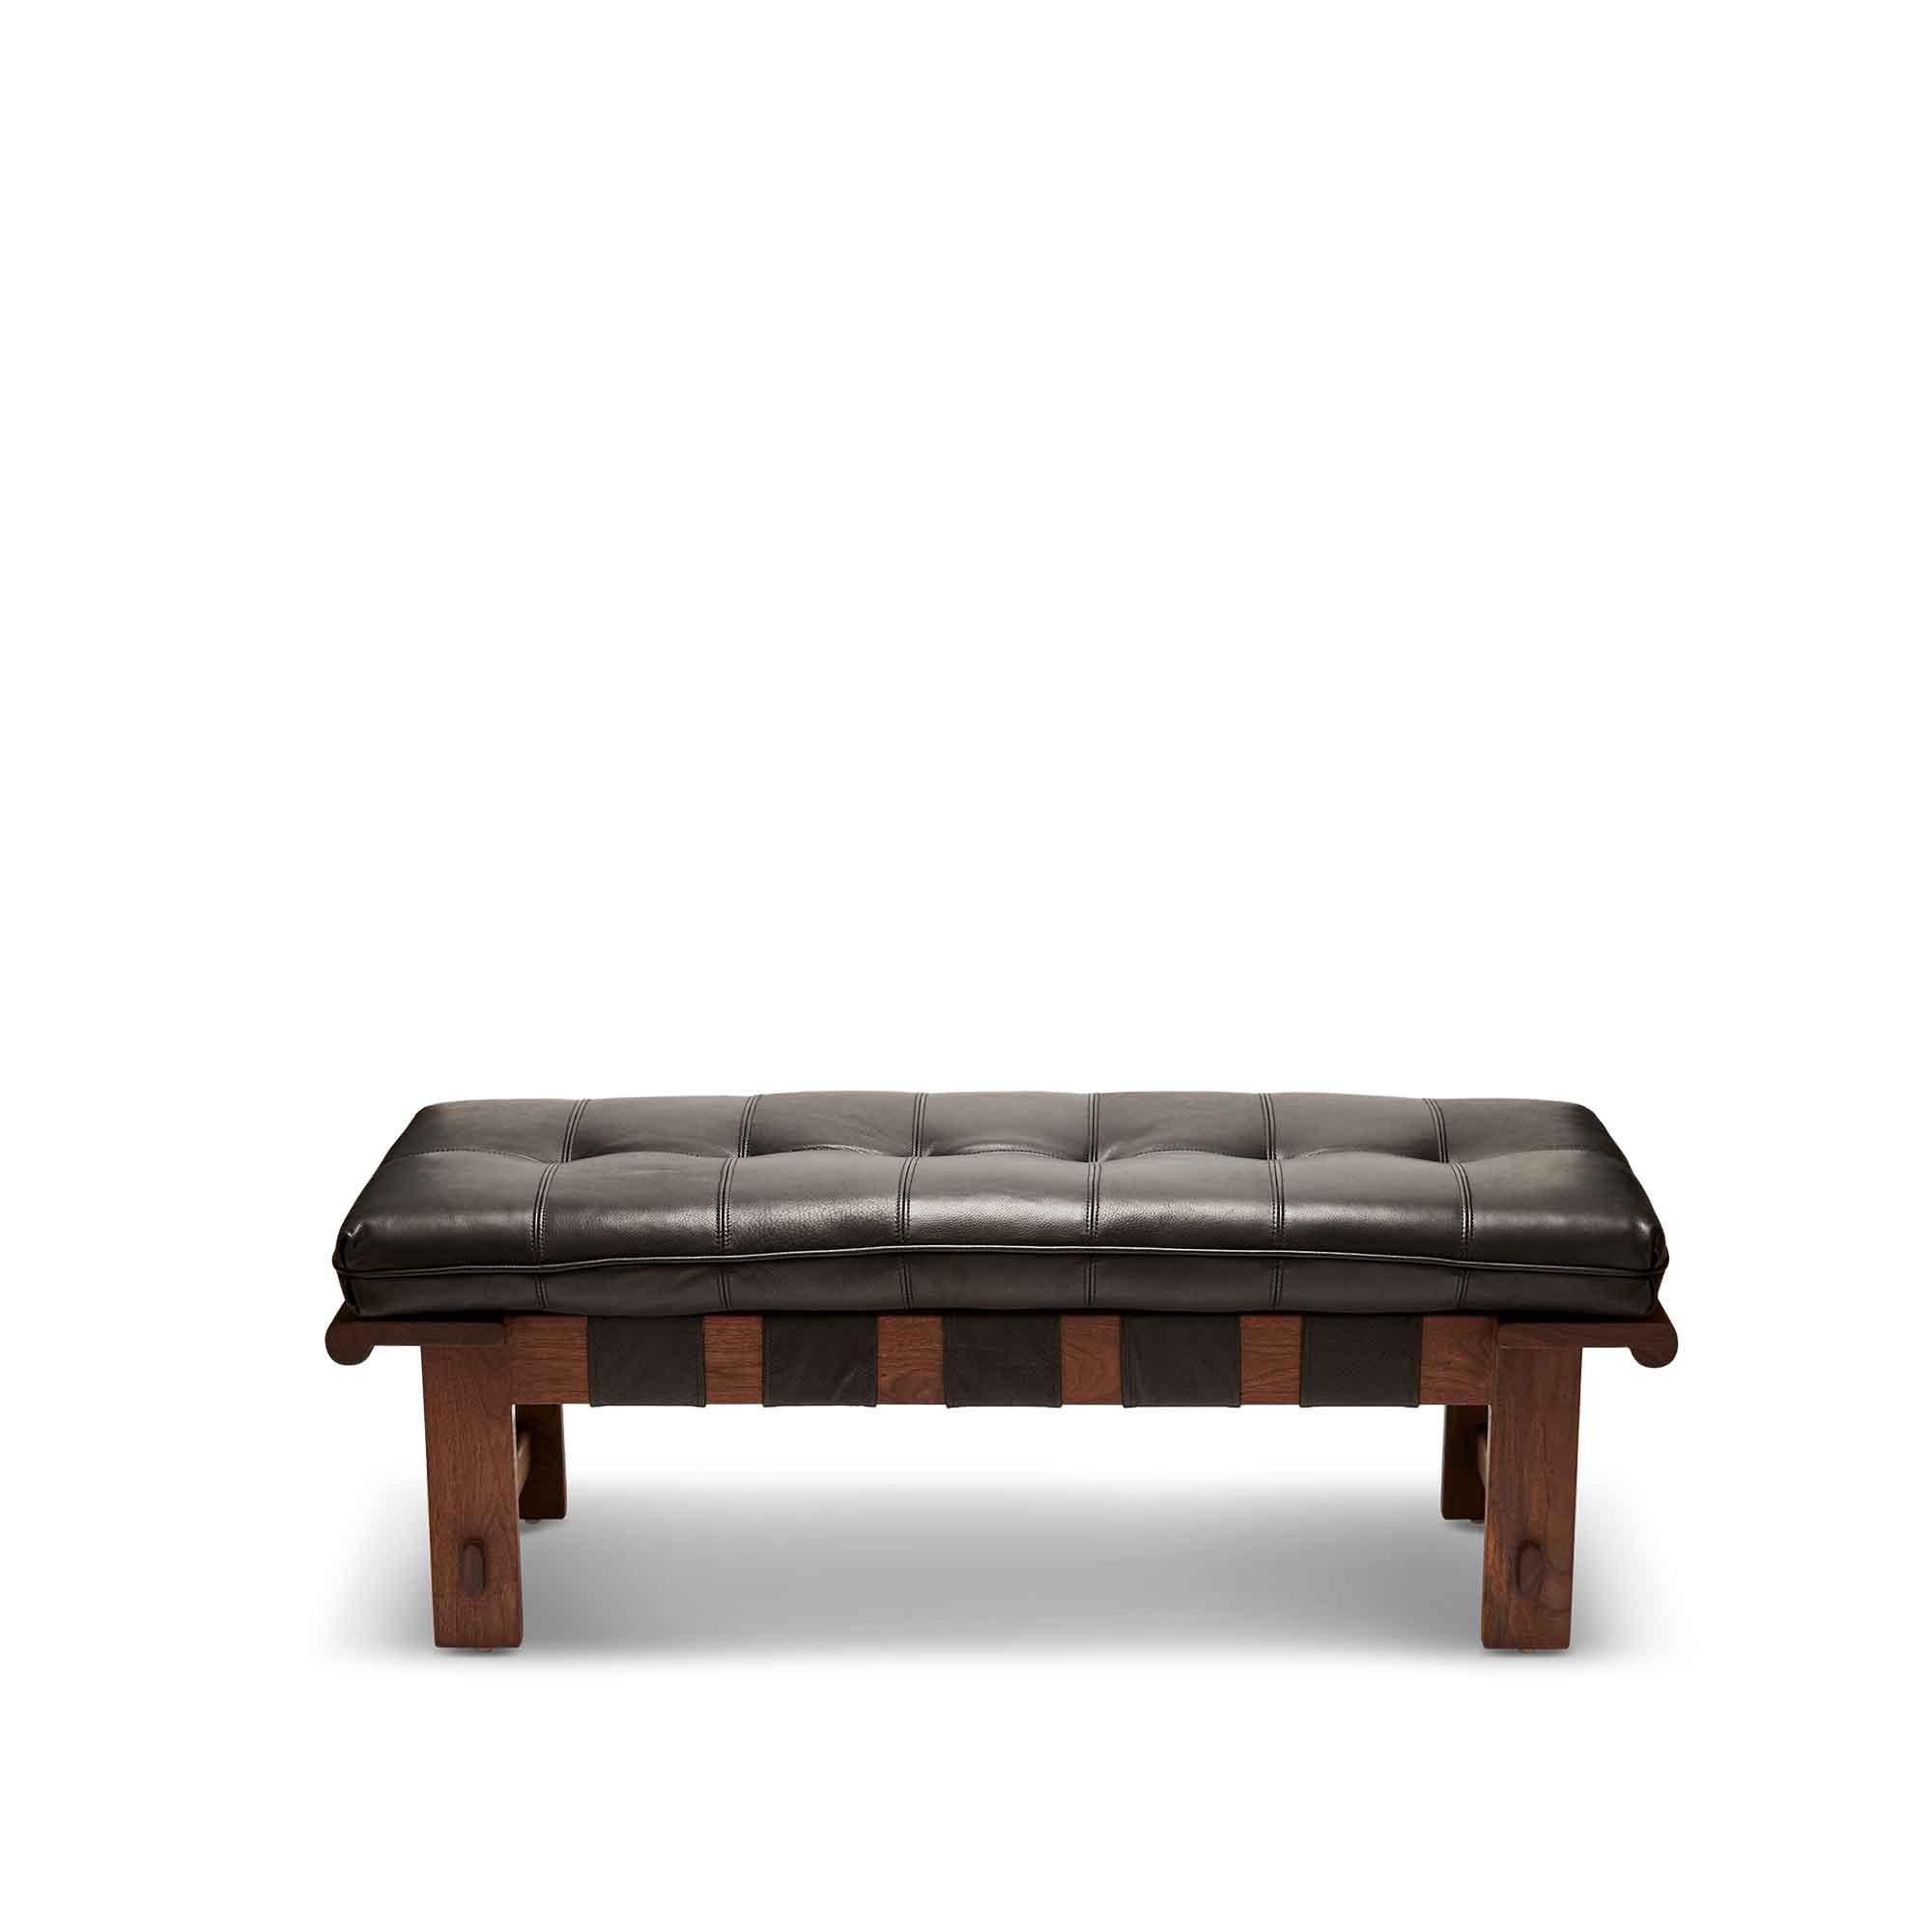 Mid-Century Modern Walnut and Black Leather Ojai Bench by Lawson-Fenning For Sale